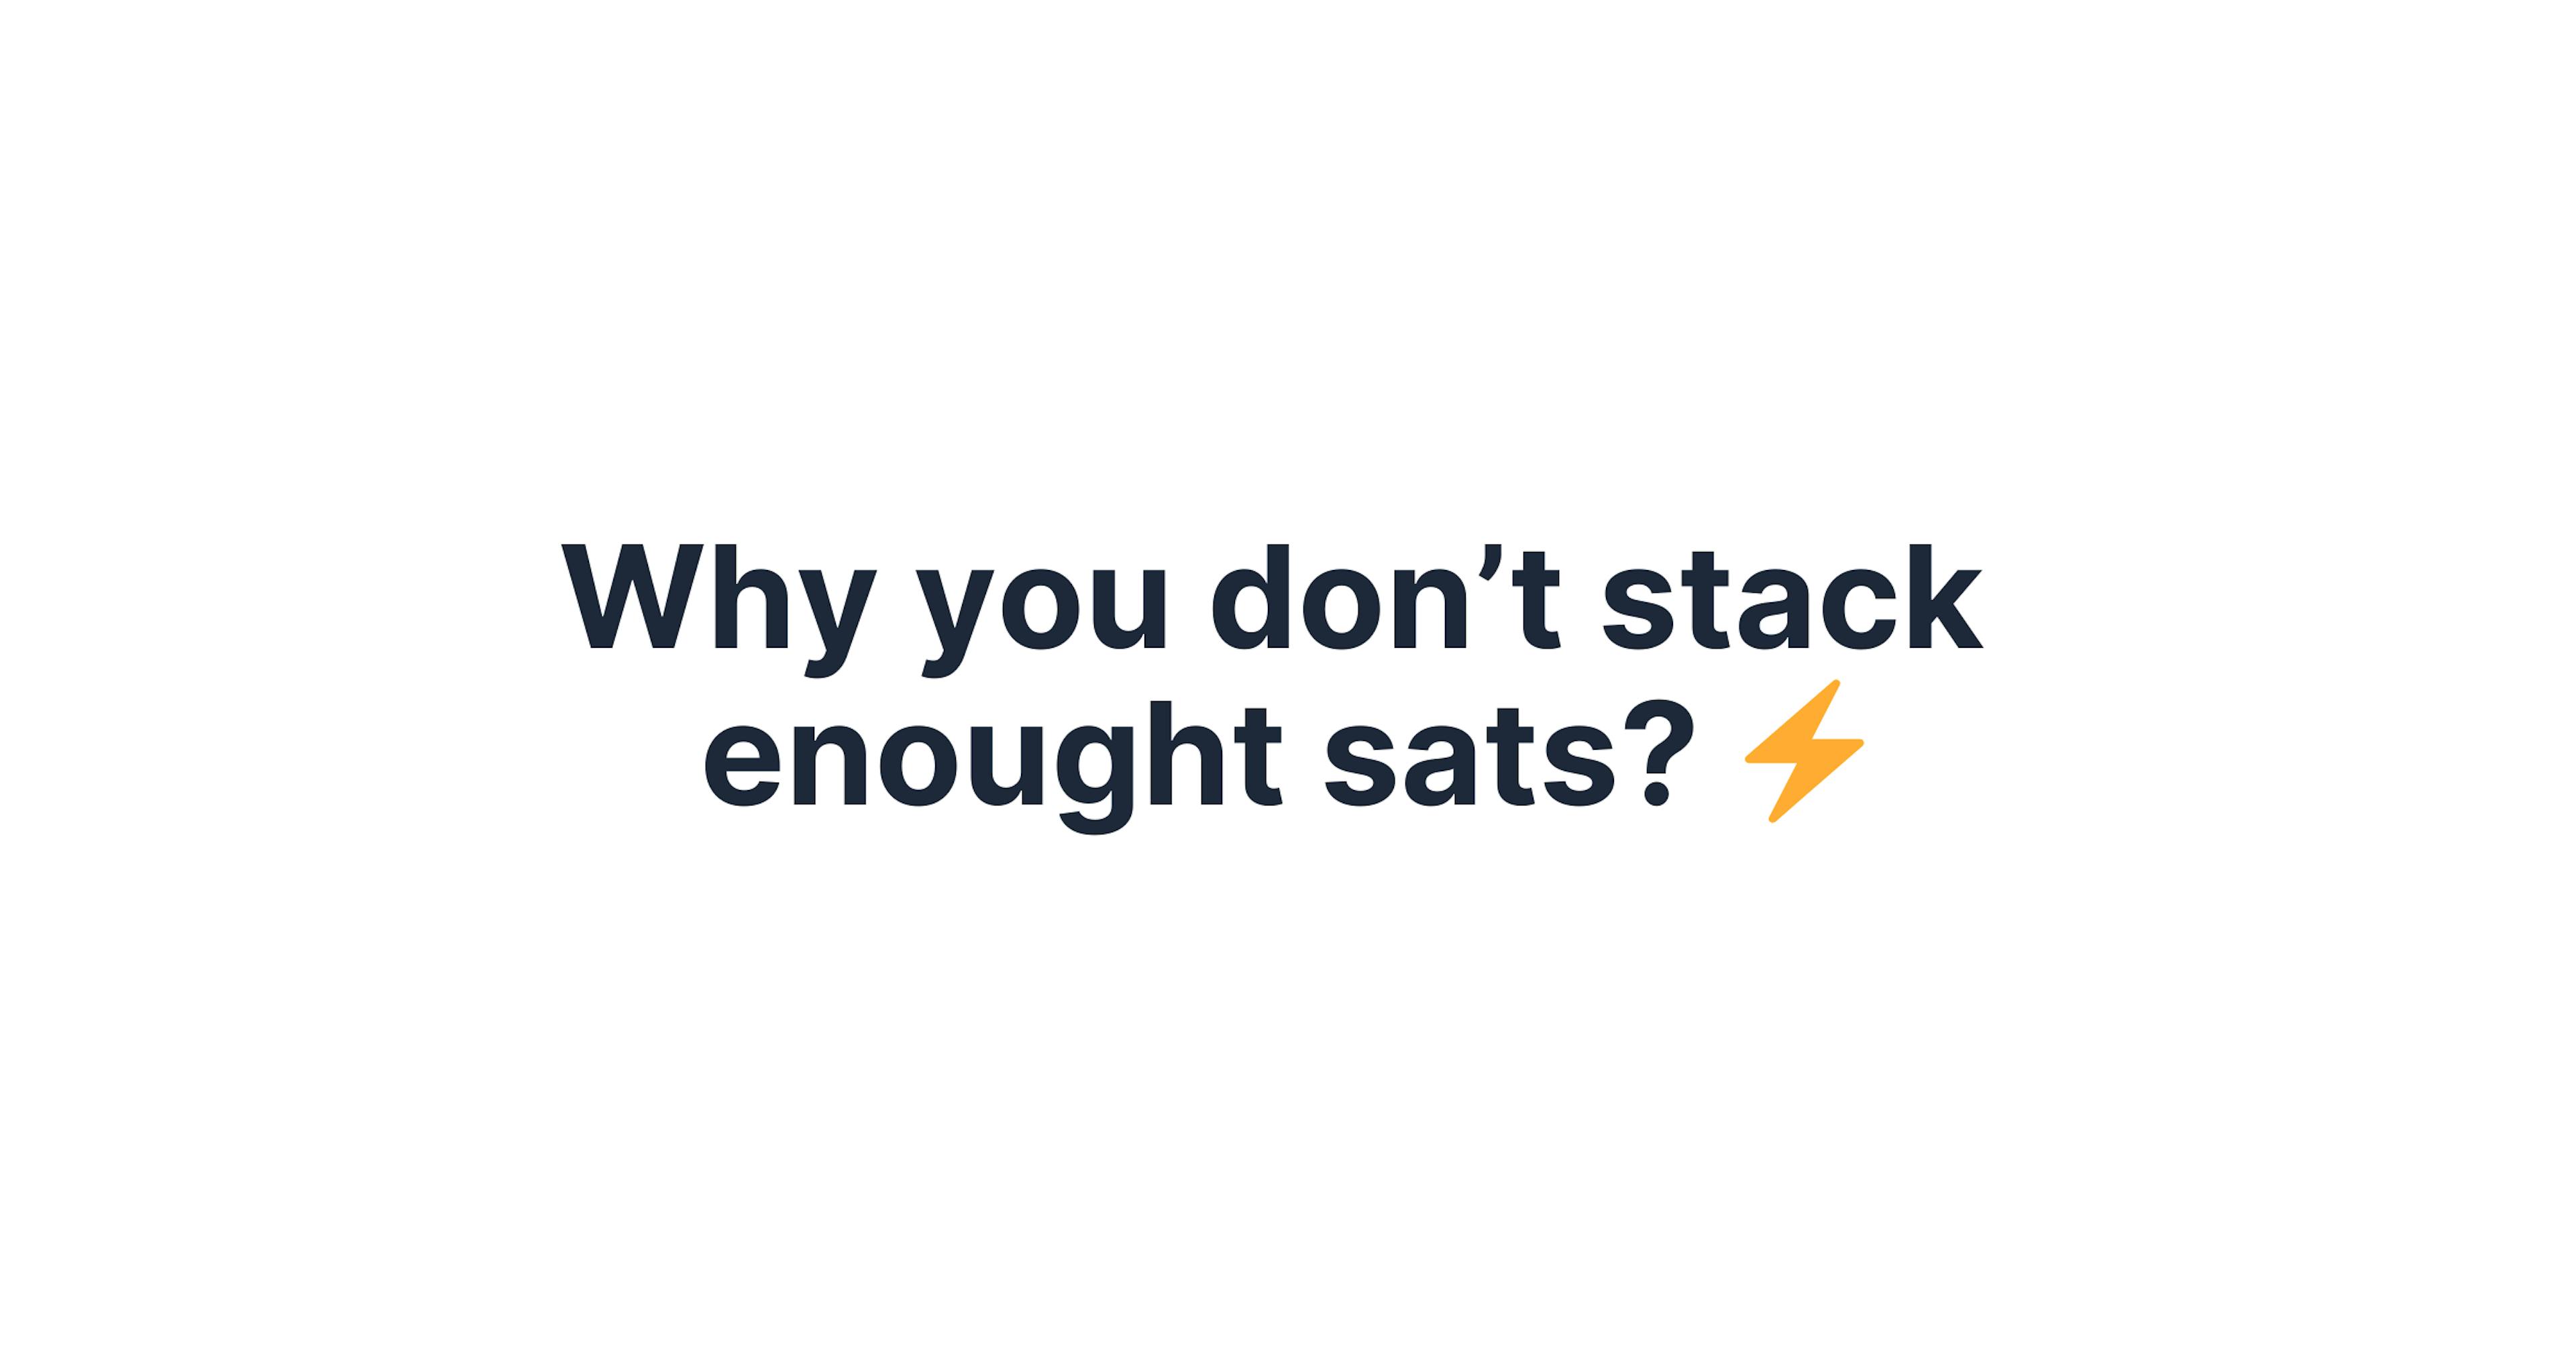 Why you don’t stack enought sats?